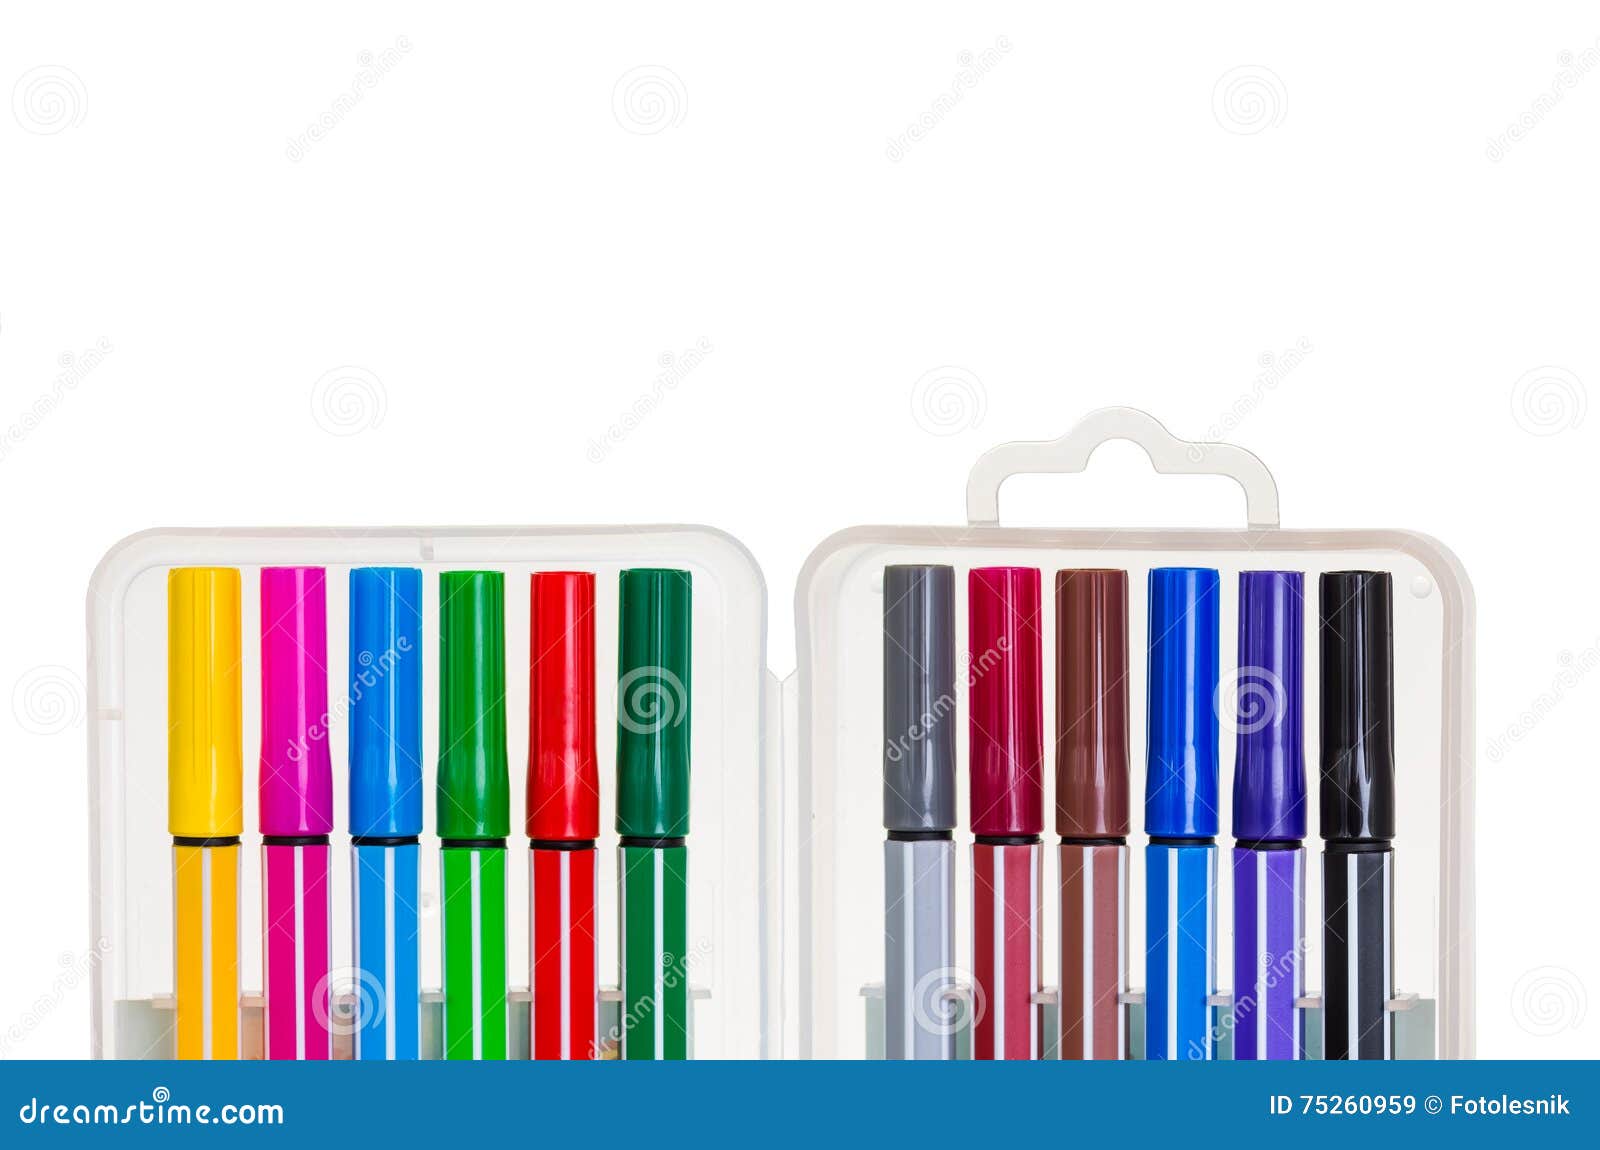 Premium Photo  Six bright colored markers isolated on a white